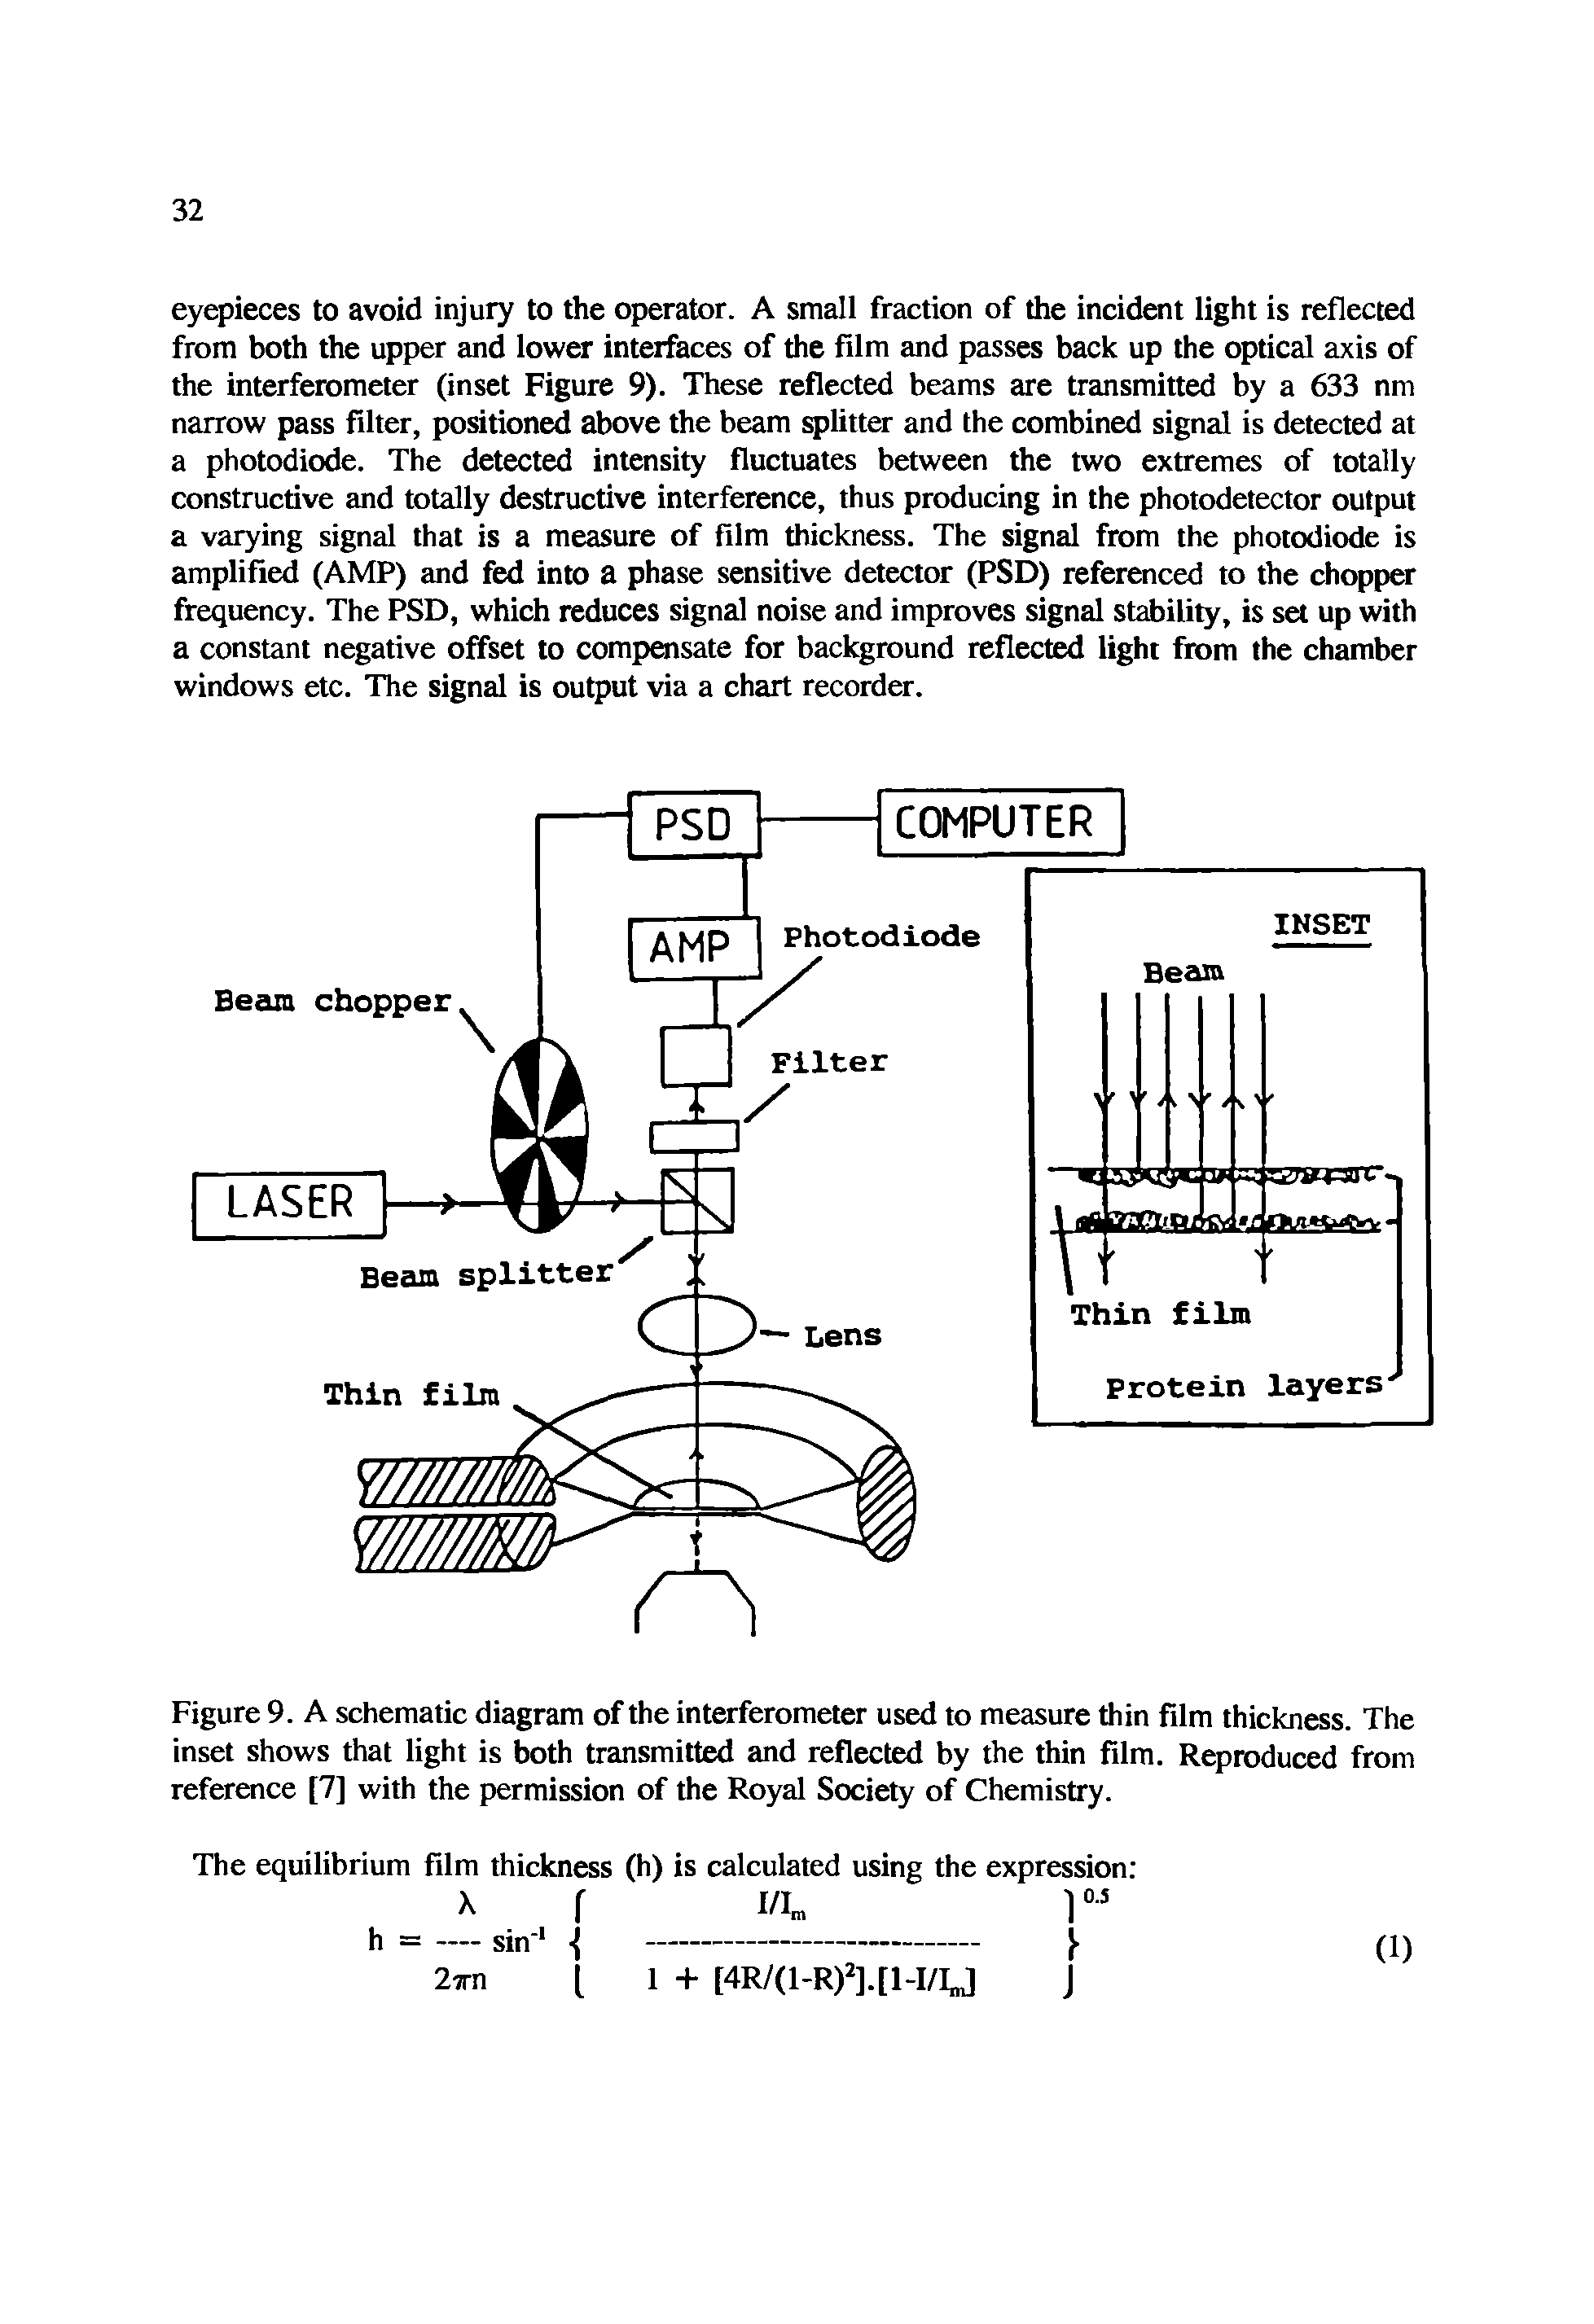 Figure 9. A schematic diagram of the interferometer used to measure thin film thickness. The inset shows that light is both transmitted and reflected by the thin film. Reproduced from reference [7] with the permission of the Royal Society of Chemistry.